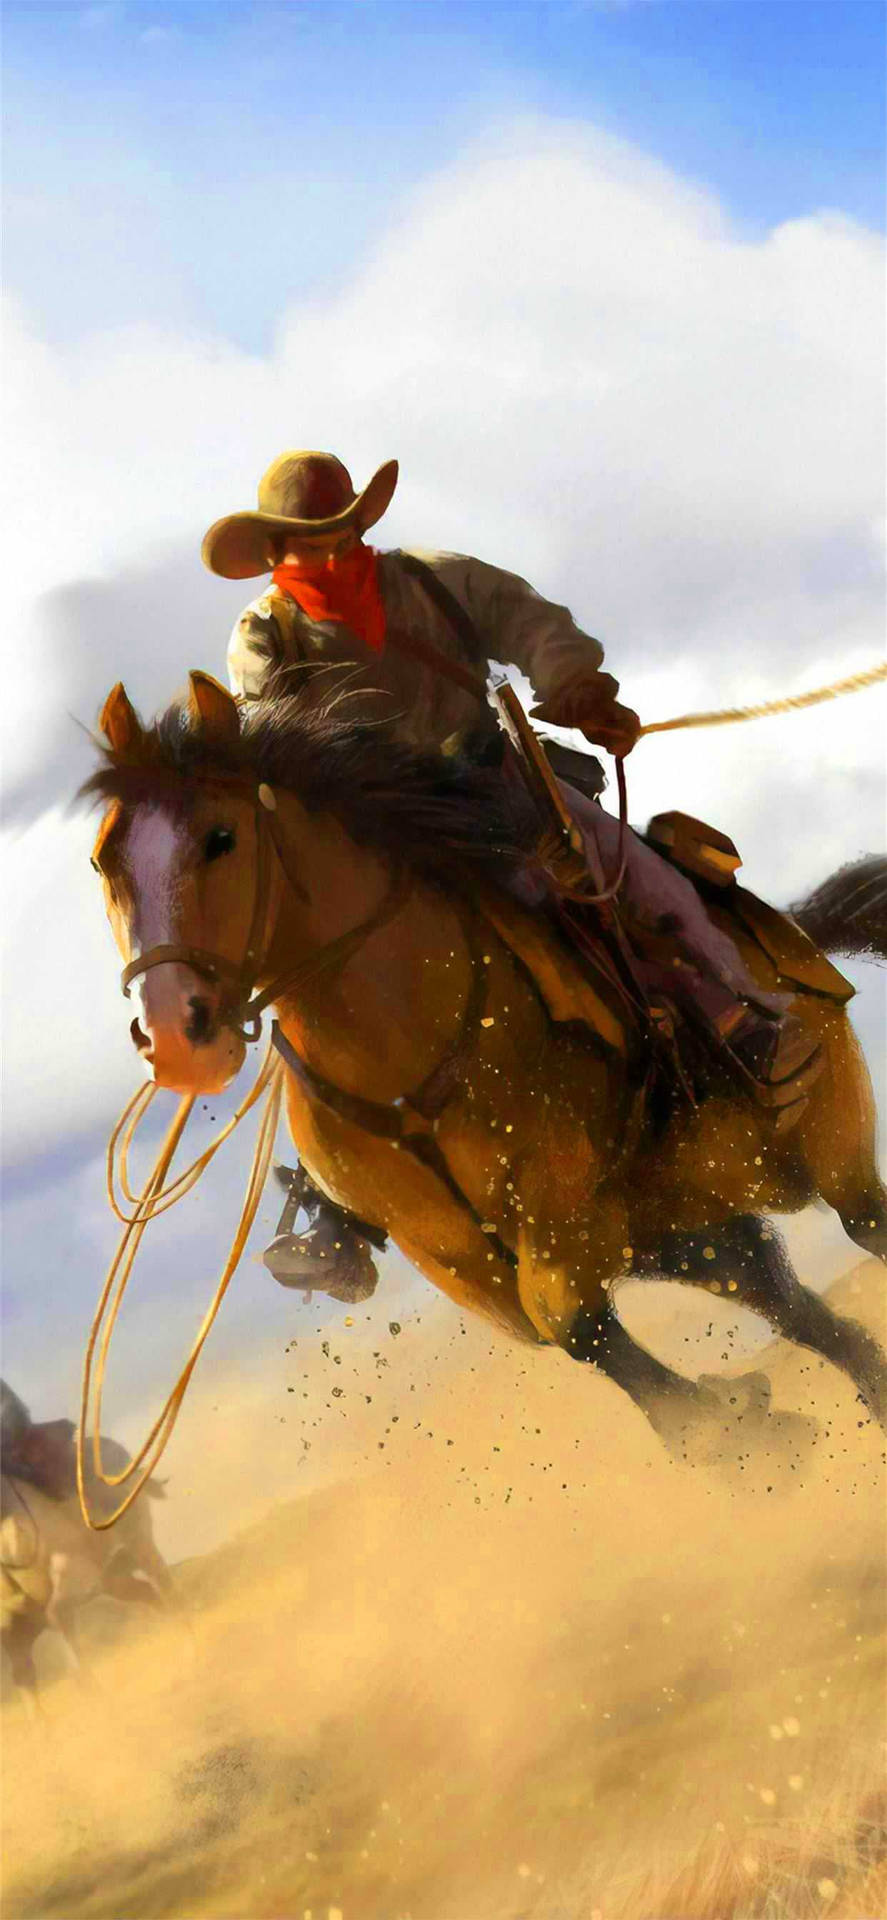 Enstolt Amerikansk Cowboy Som Visar Upp Sina Imponerande Färdigheter I Häst-ridning. (this Sentence Is Not Related To Computer Or Mobile Wallpaper So If You Would Like Me To Translate Something In Context Of Wallpaper, Please Provide Me With The English Sentence) Wallpaper